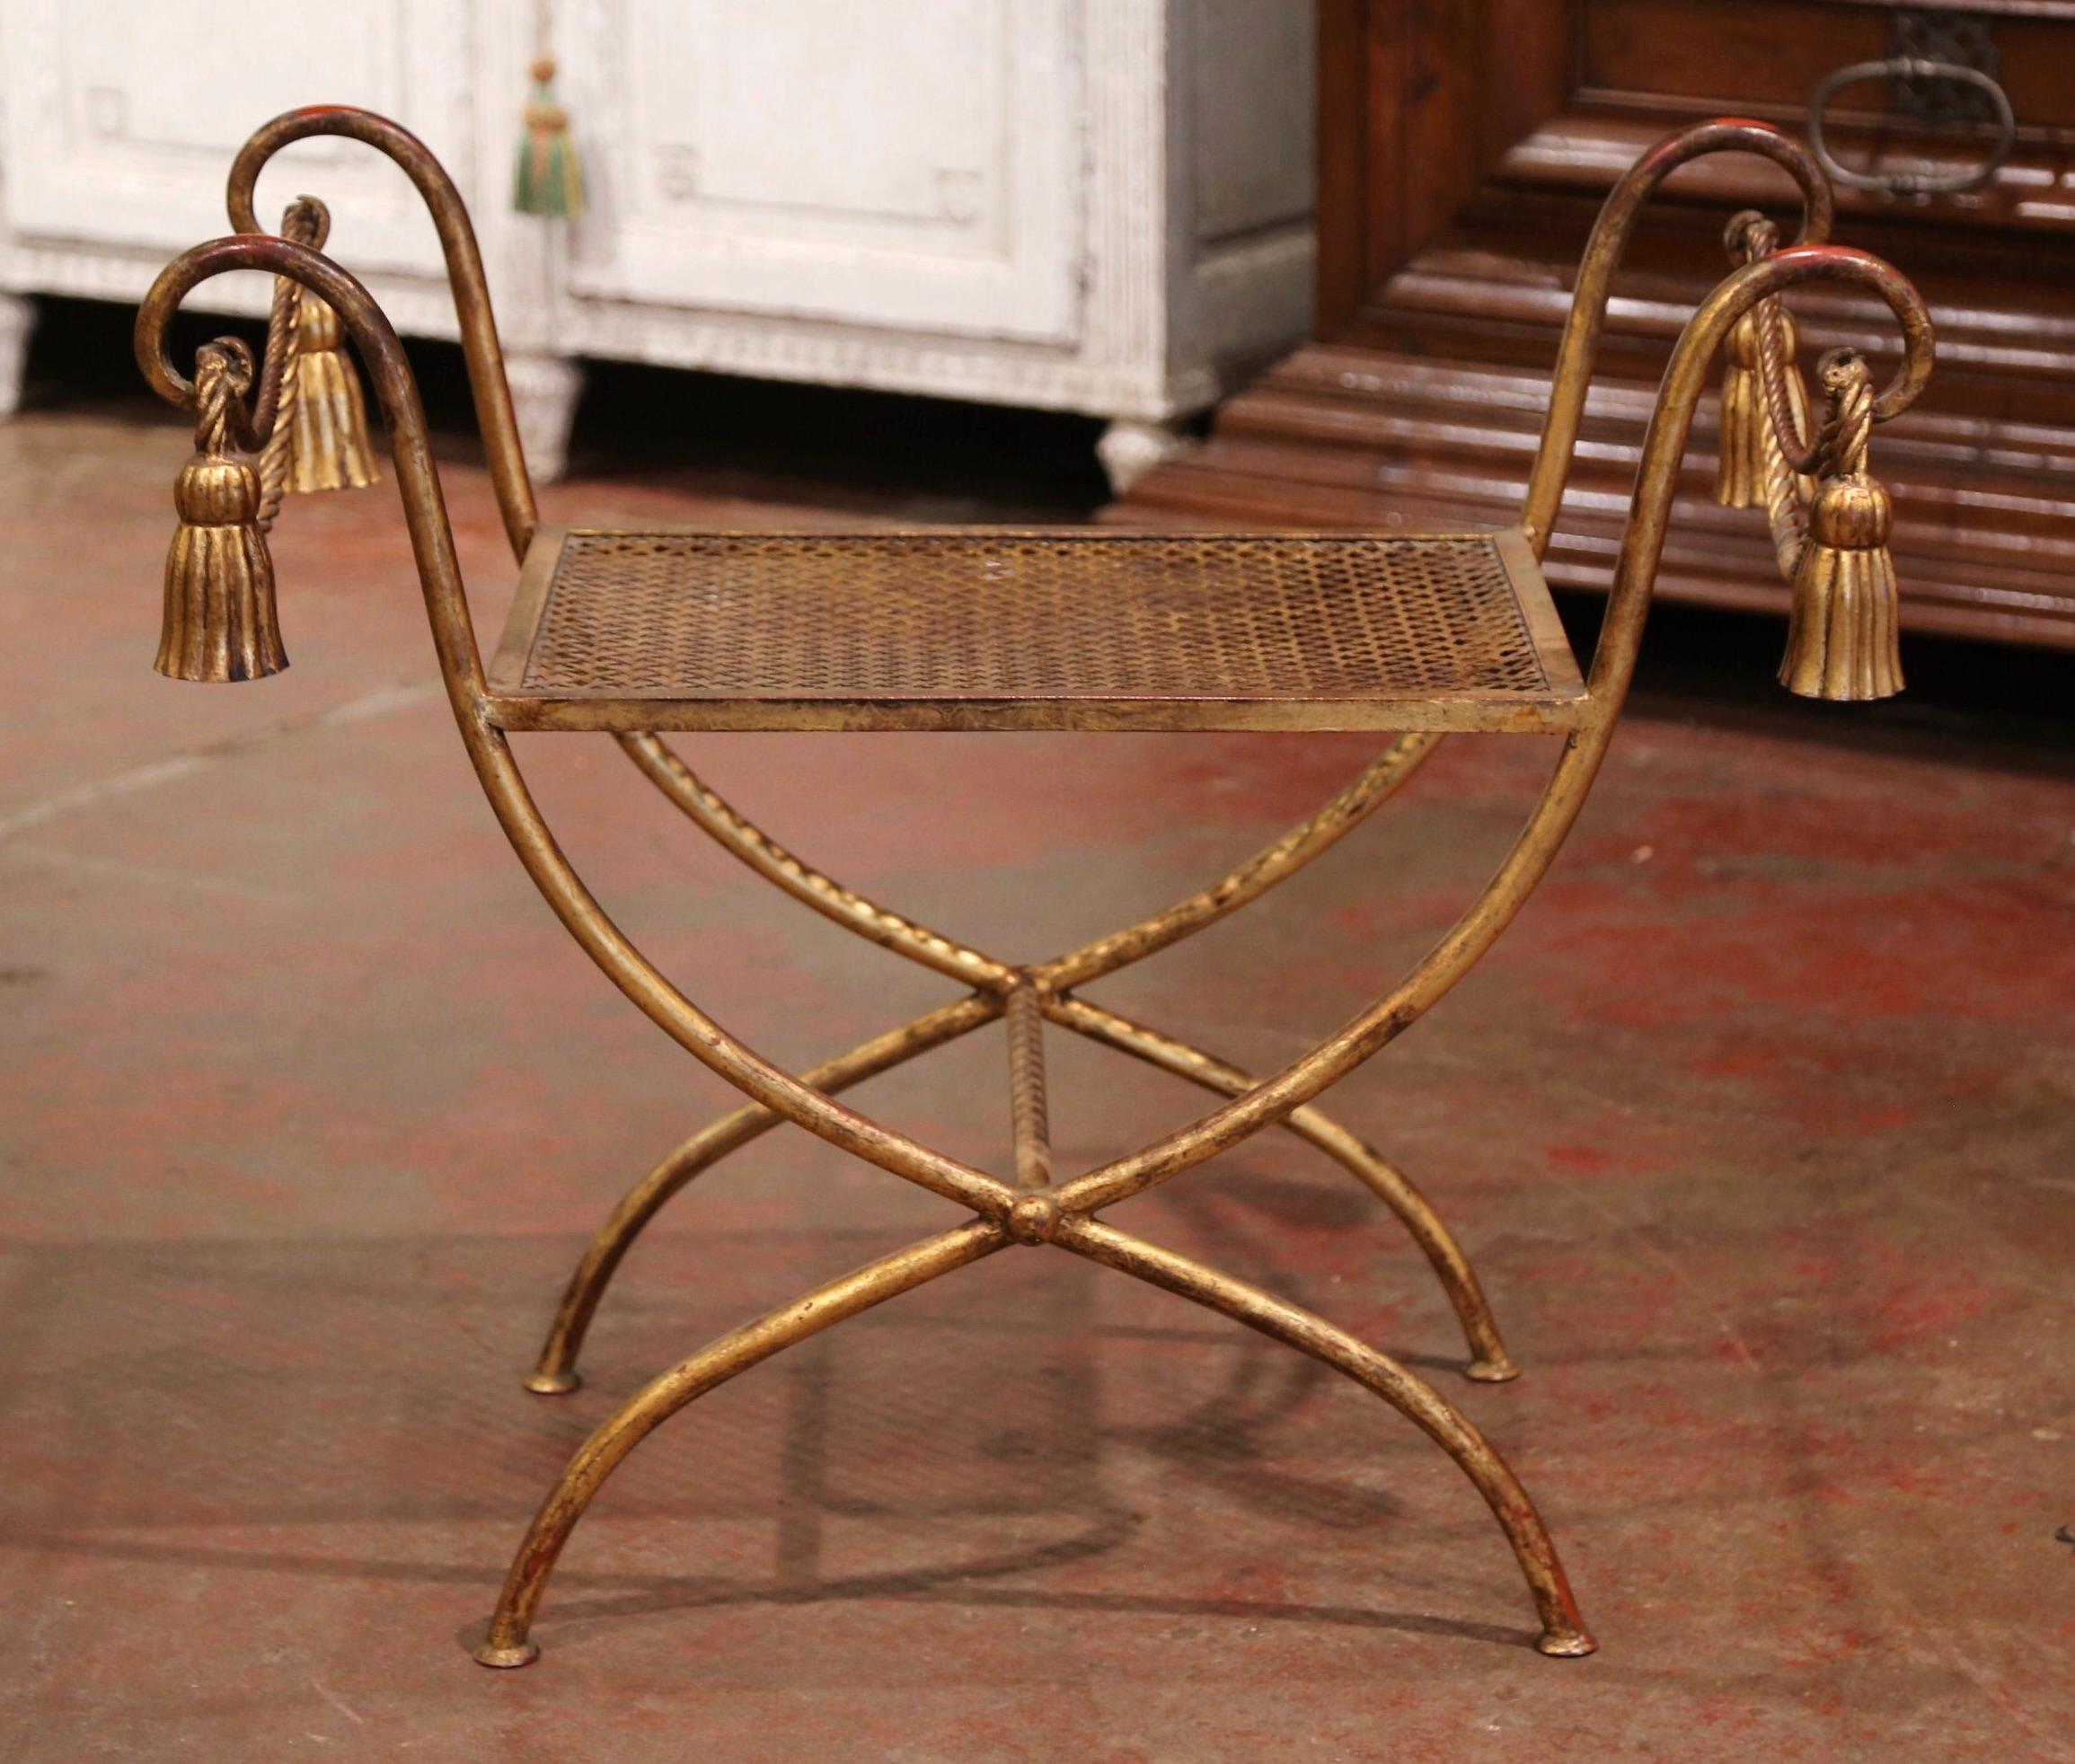 Iron Midcentury Hollywood Regency Style Gilt Painted Metal Curule Form Bench